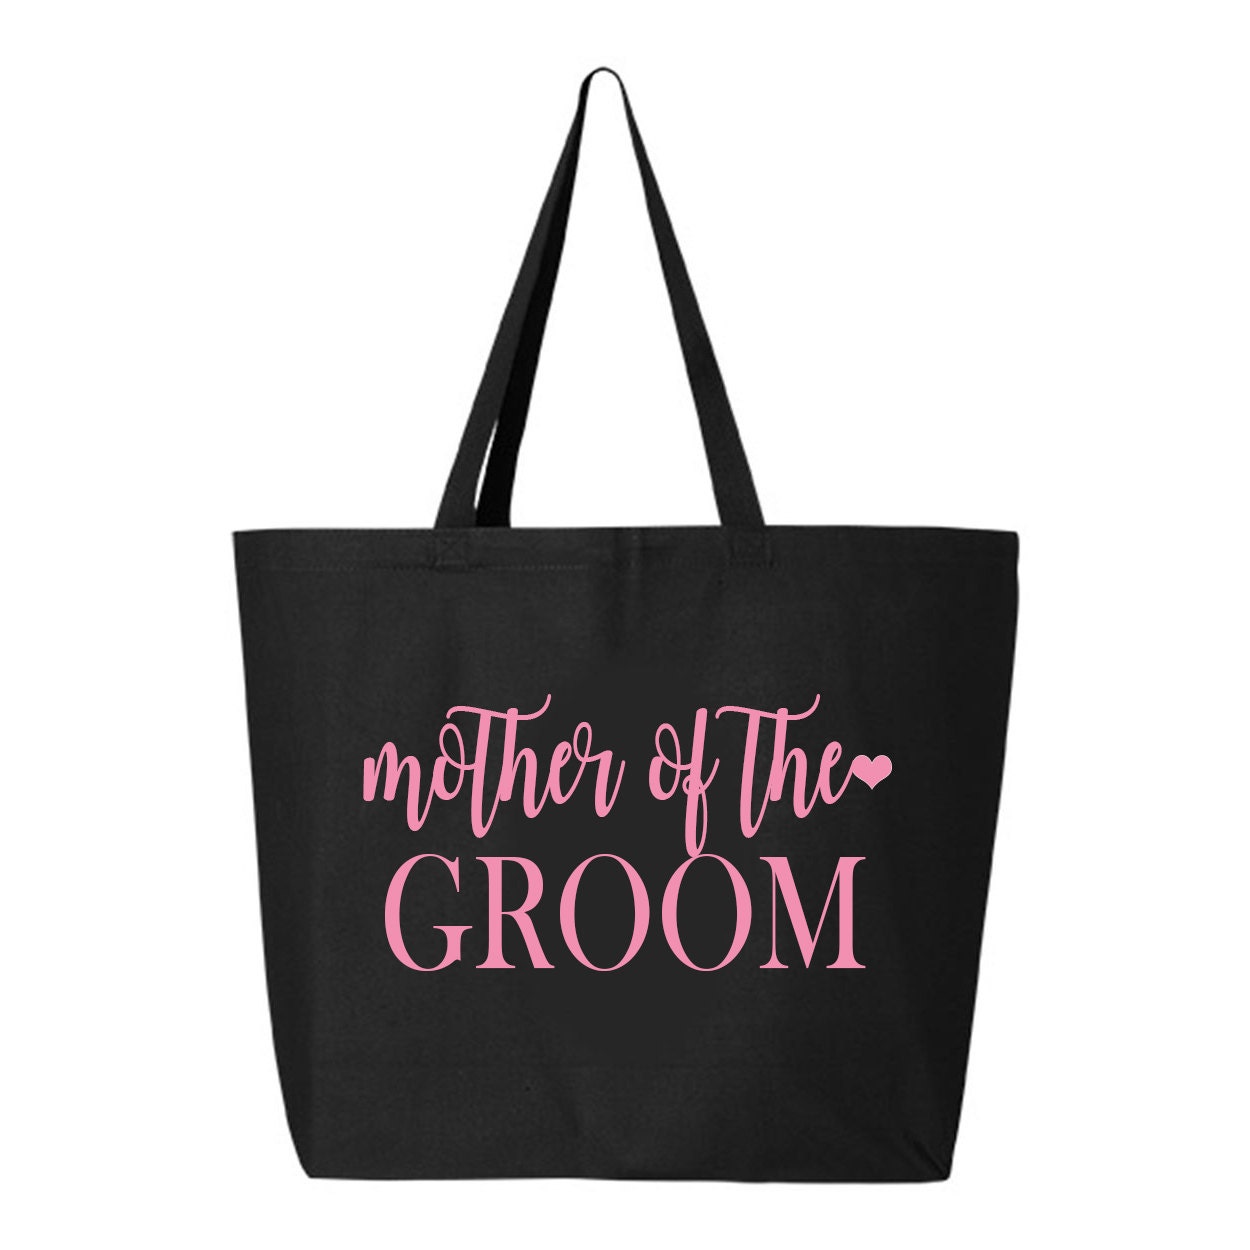 Mother of the Groom Tote Bag Jumbo Mother of the Groom Tote